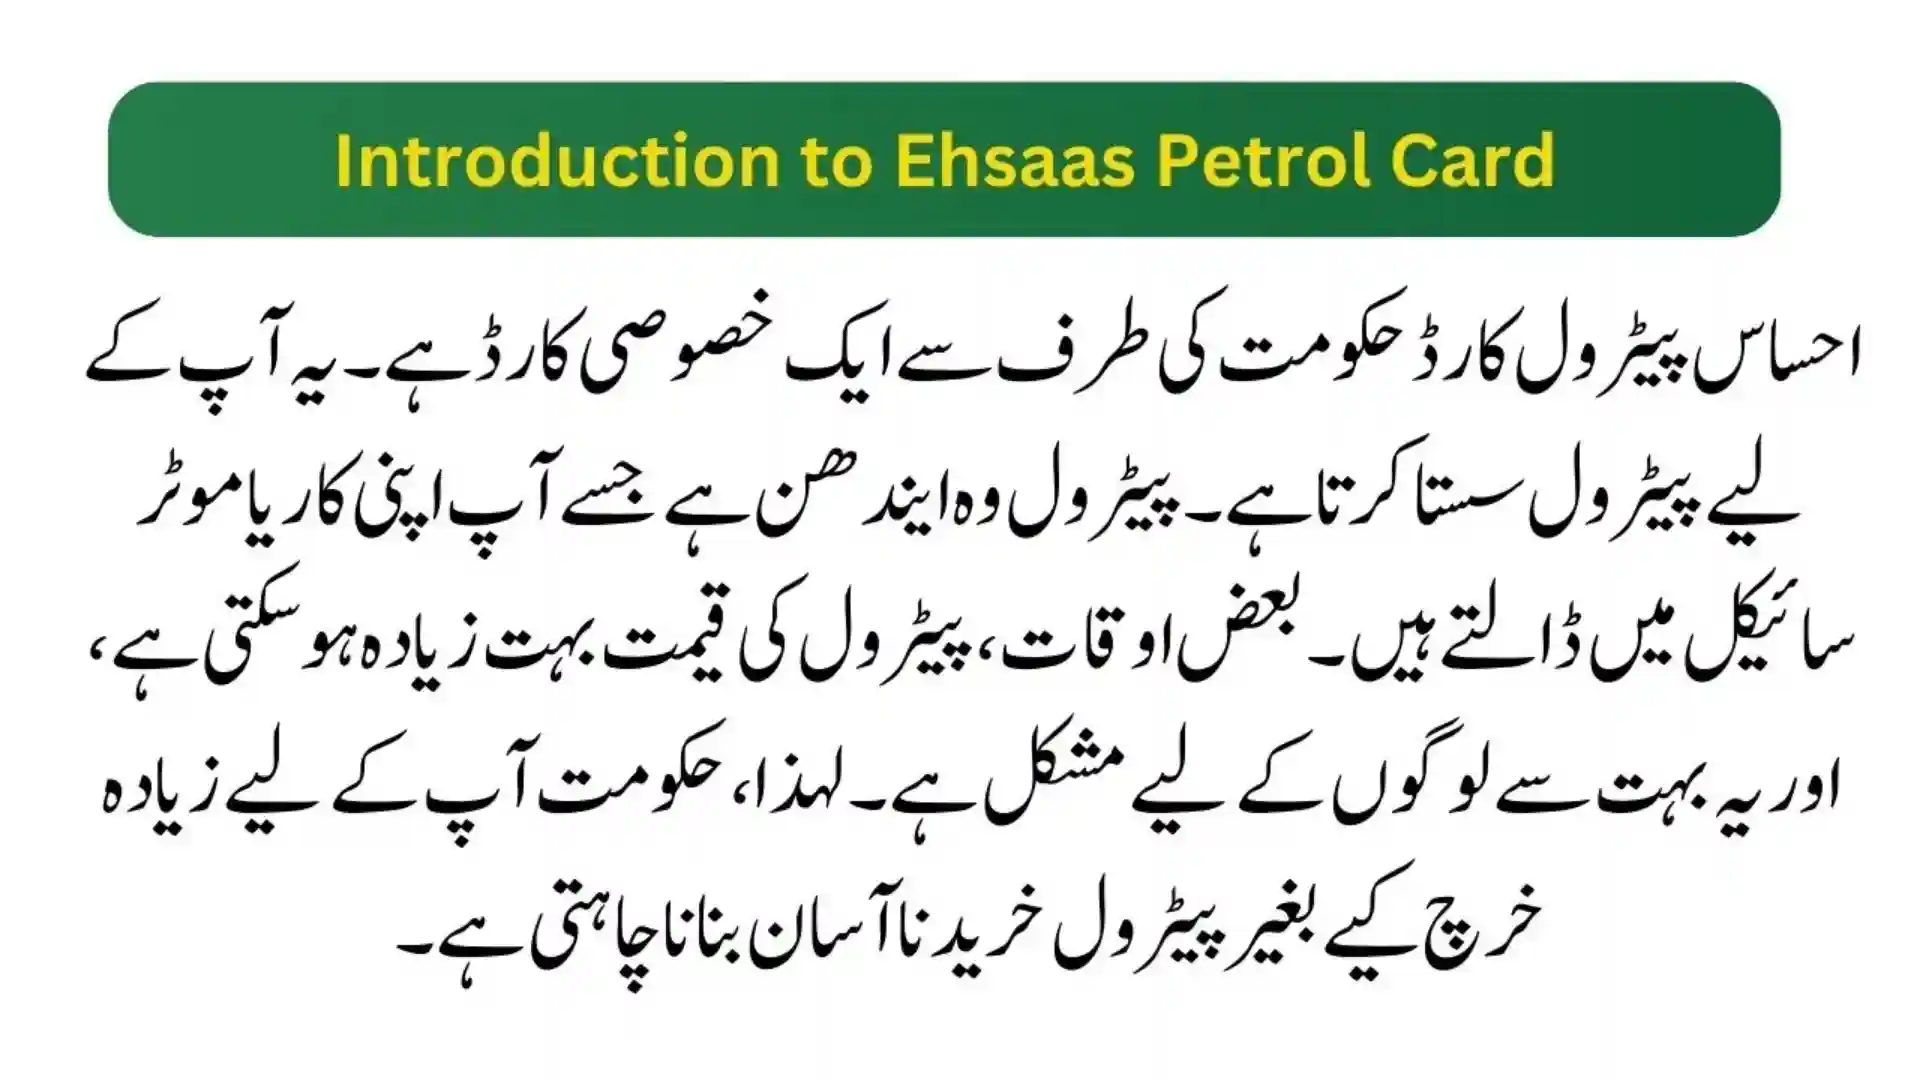 Introduction to PM Ehsaas Petrol Card Online Registration